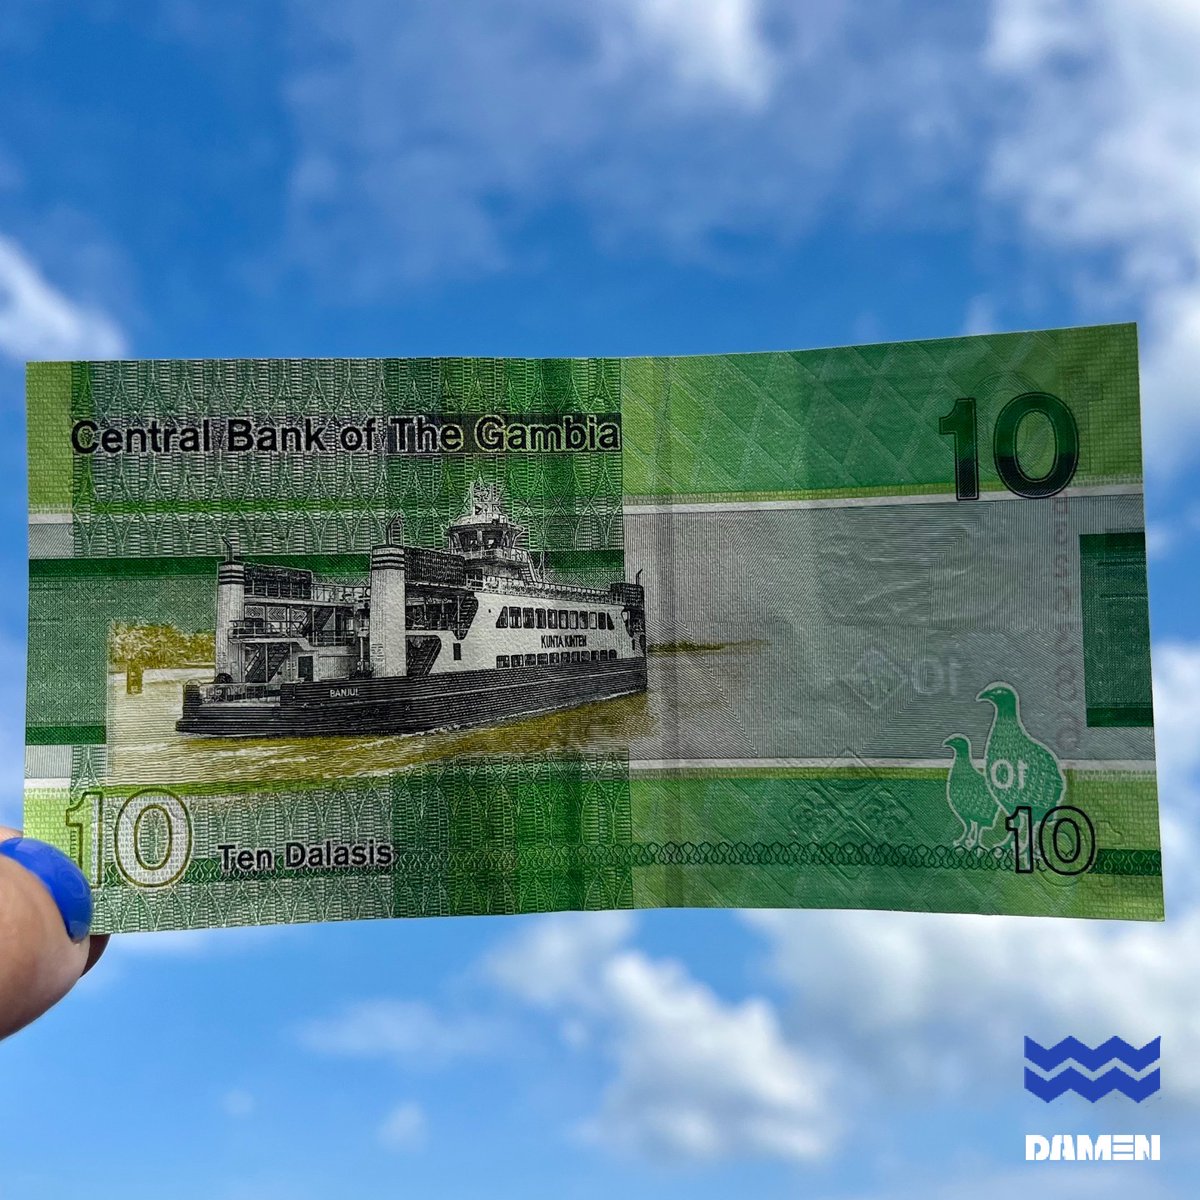 Did you know that a Damen vessel can be seen on millions of banknotes? 💸 The 10 Dalasis note issued by the Central Bank of the Gambia shows the Damen Road Ferry 5212 Kunta Kinteh. It operates between Banjul, the capital of Gambia, and the river mouth estuary.